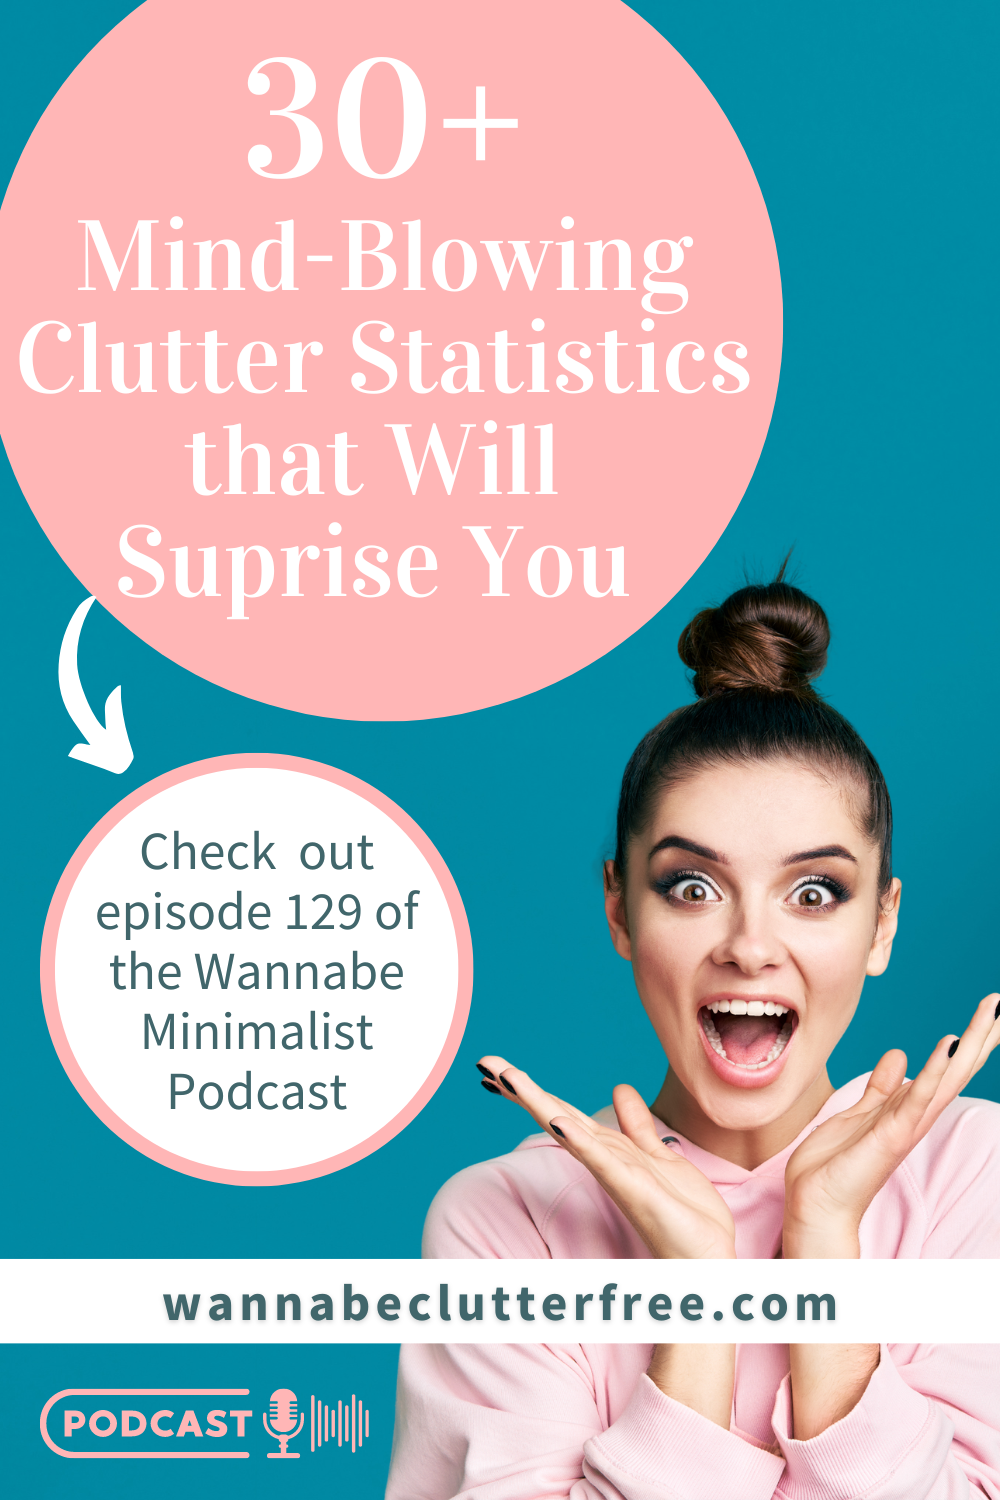 30+ Mind-Blowing Clutter Statistics That will Boggle Your Mind